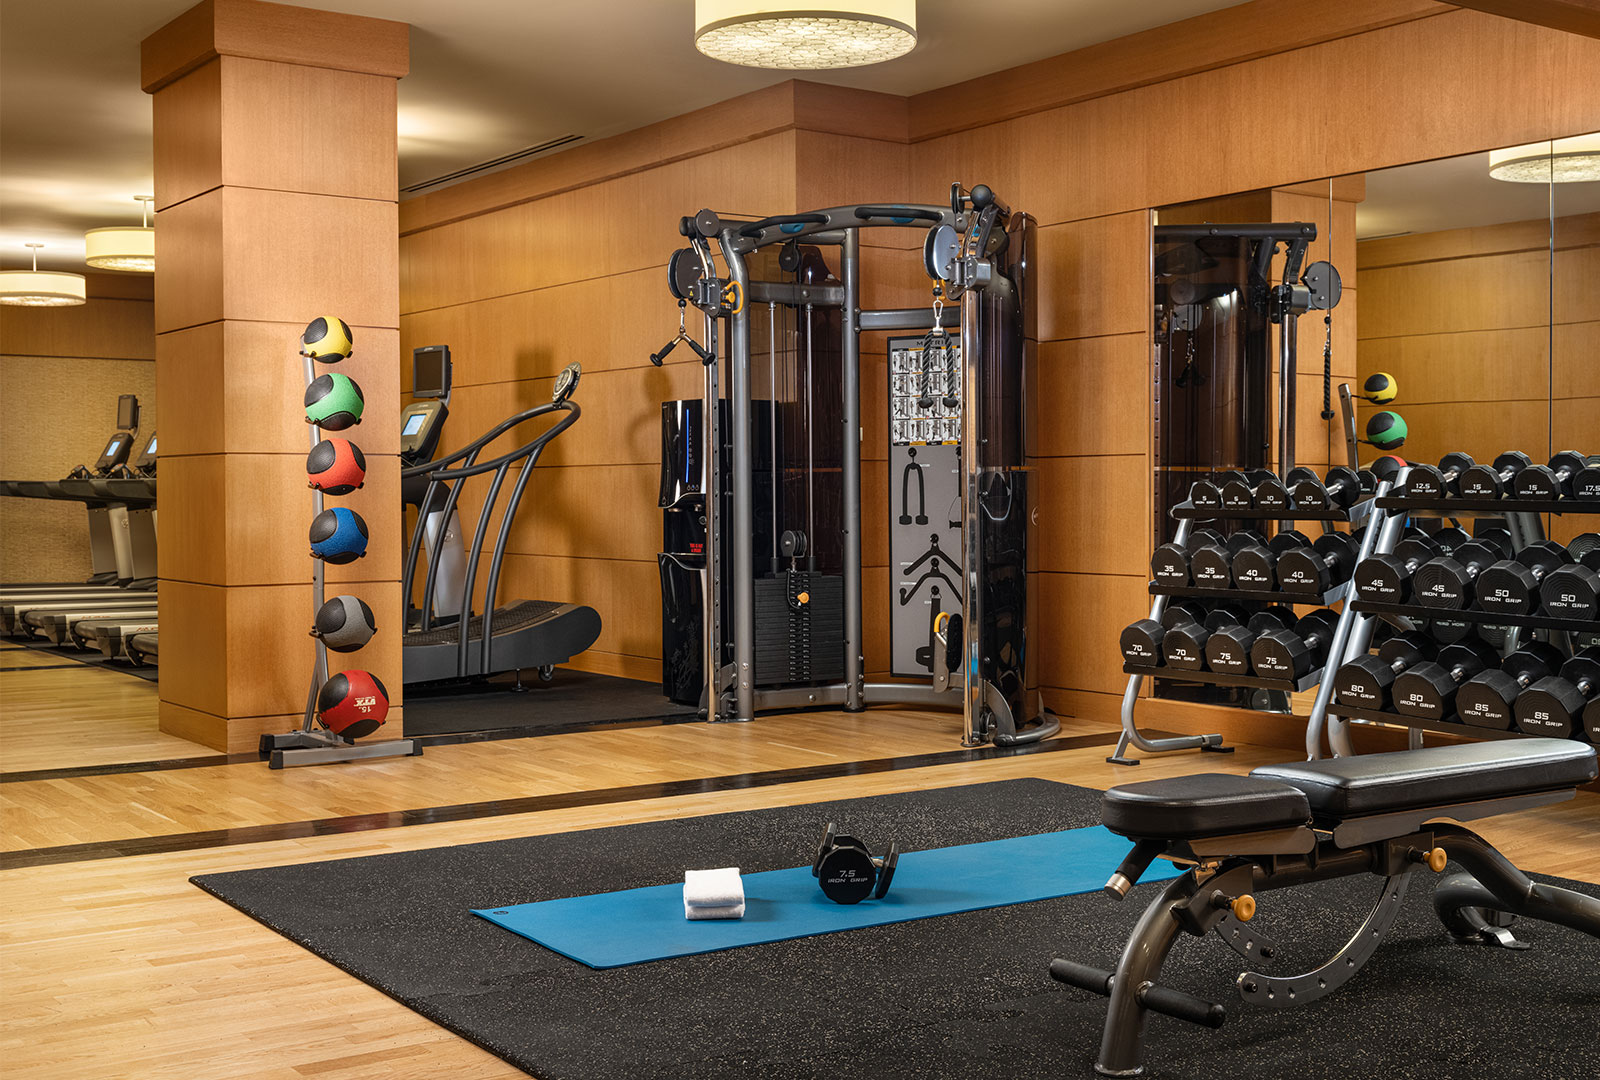 Grand America's Fitness Center featuring cardio equipment, free weights, and strength training stations.